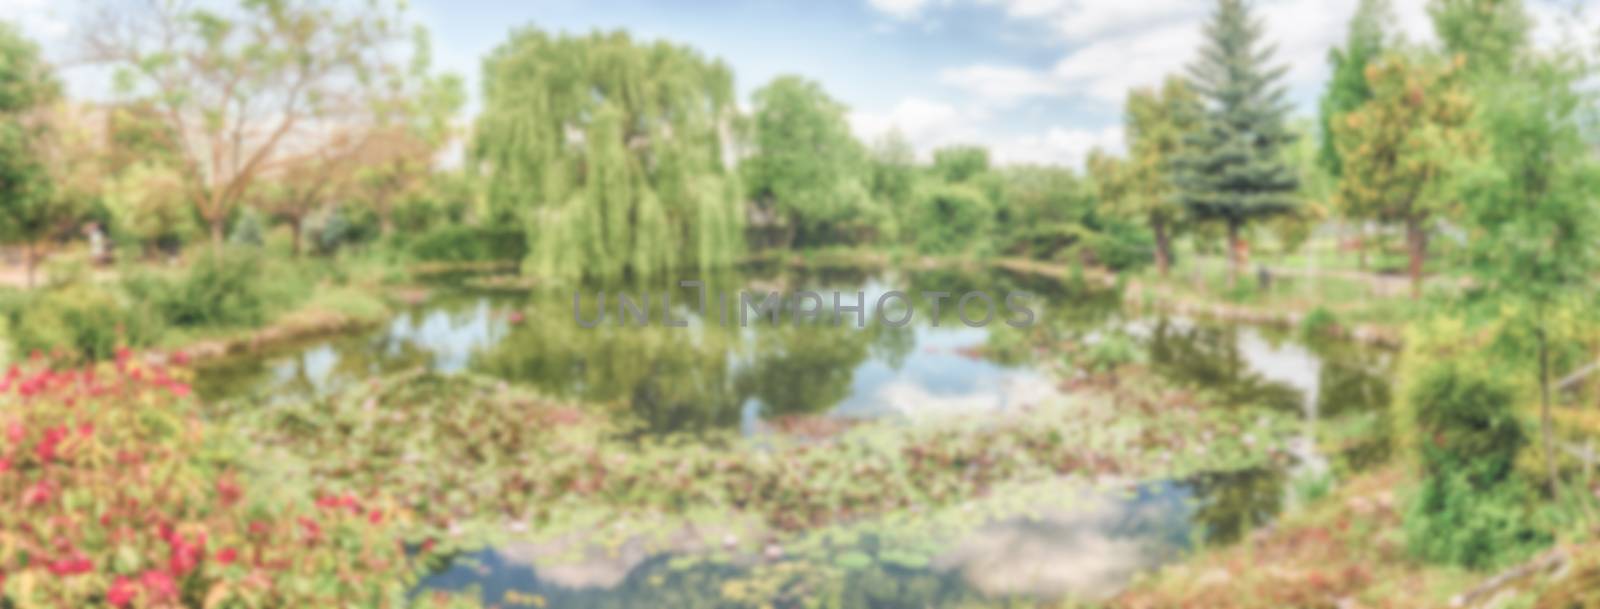 Defocused background with an idillic small pond in the forest by marcorubino